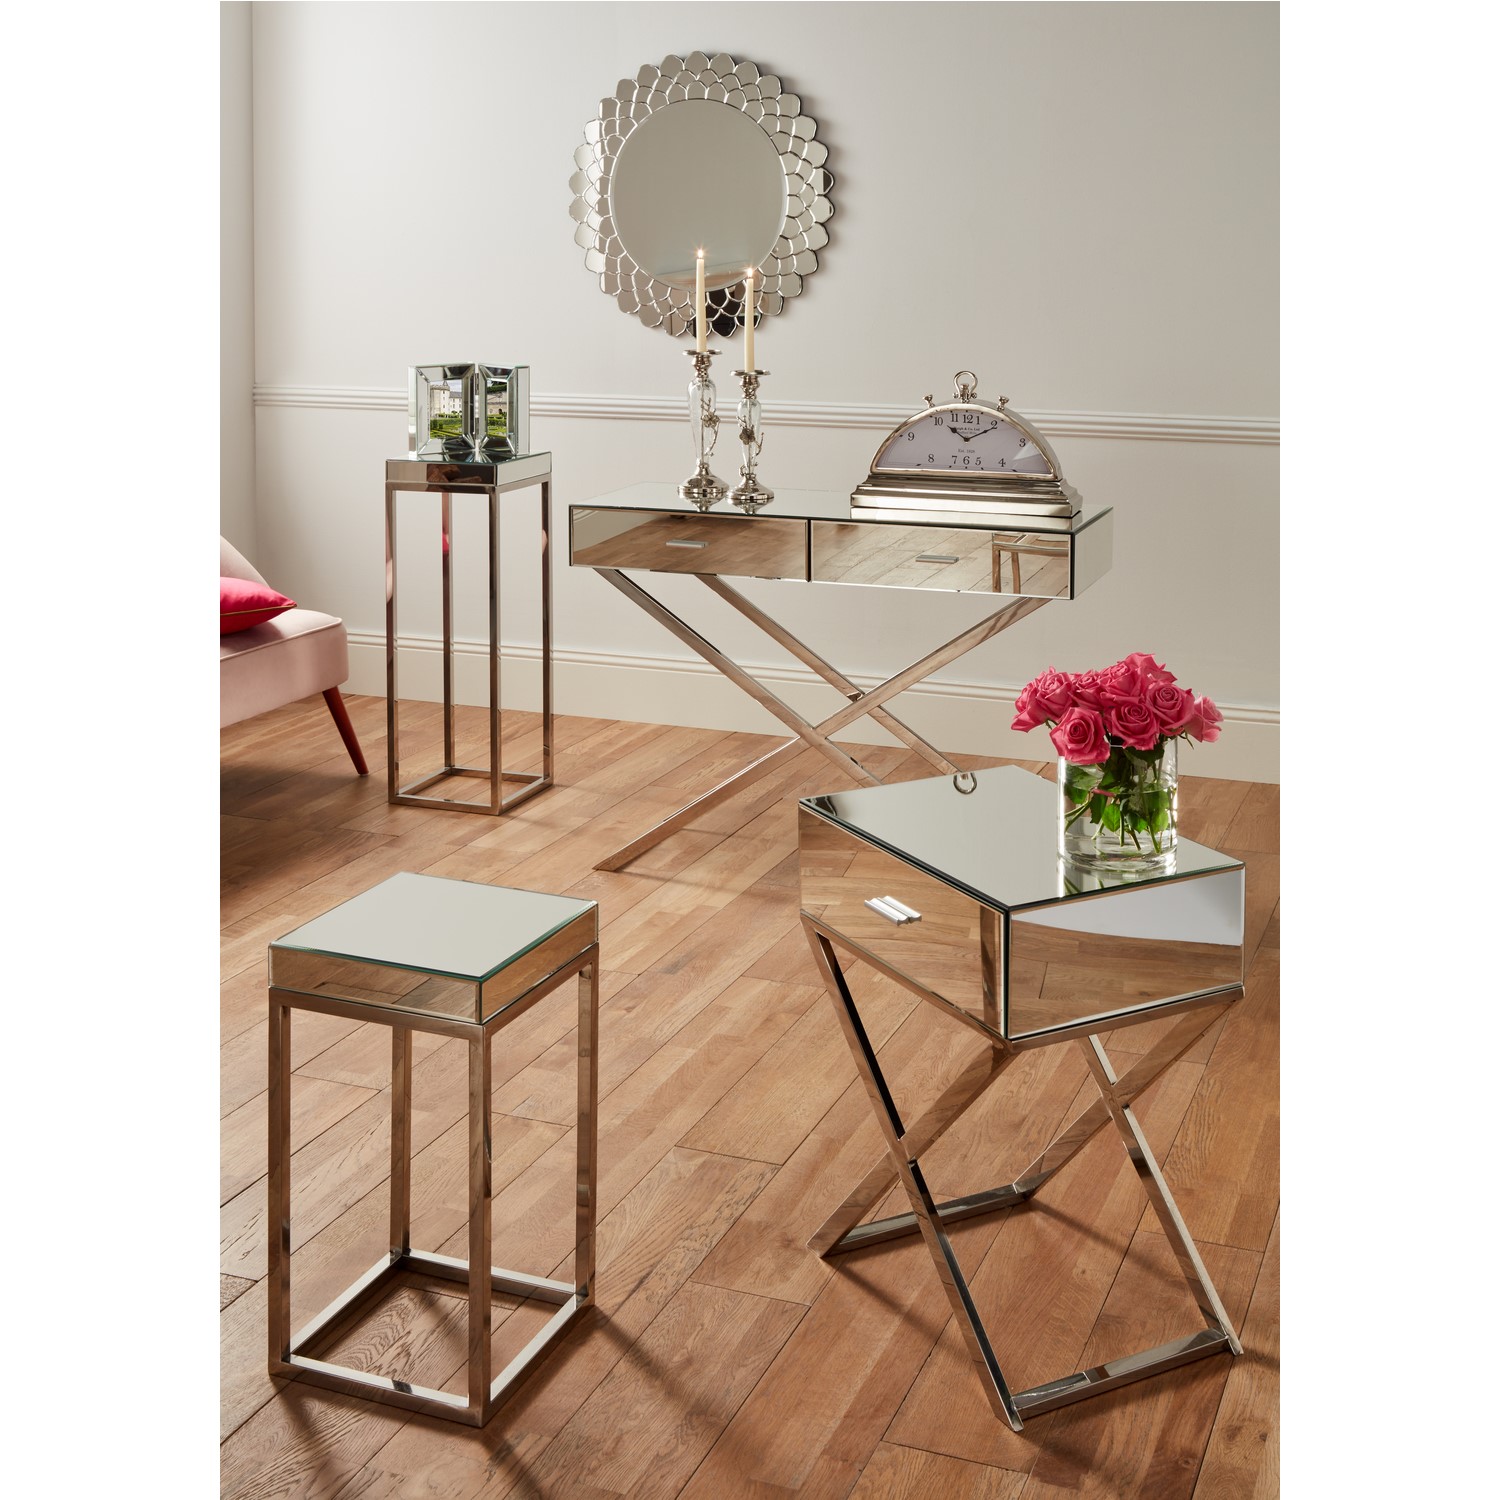 Mirrored Small Side Table In Glass, Small Mirrored End Table